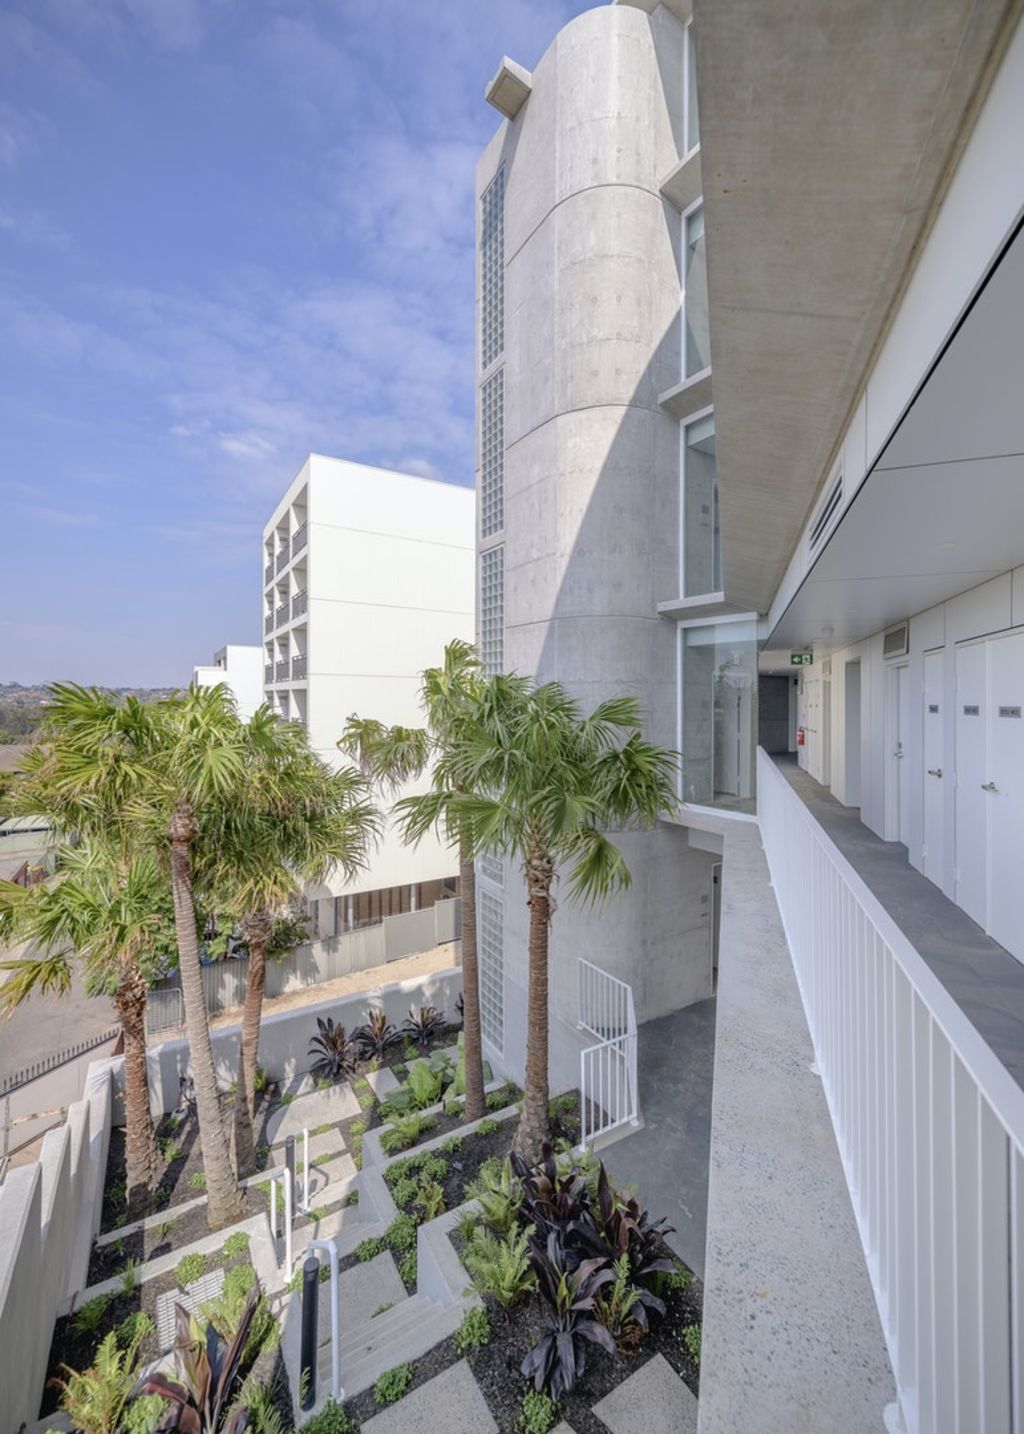 The studio apartments by Hill Thalis. Photo: Supplied